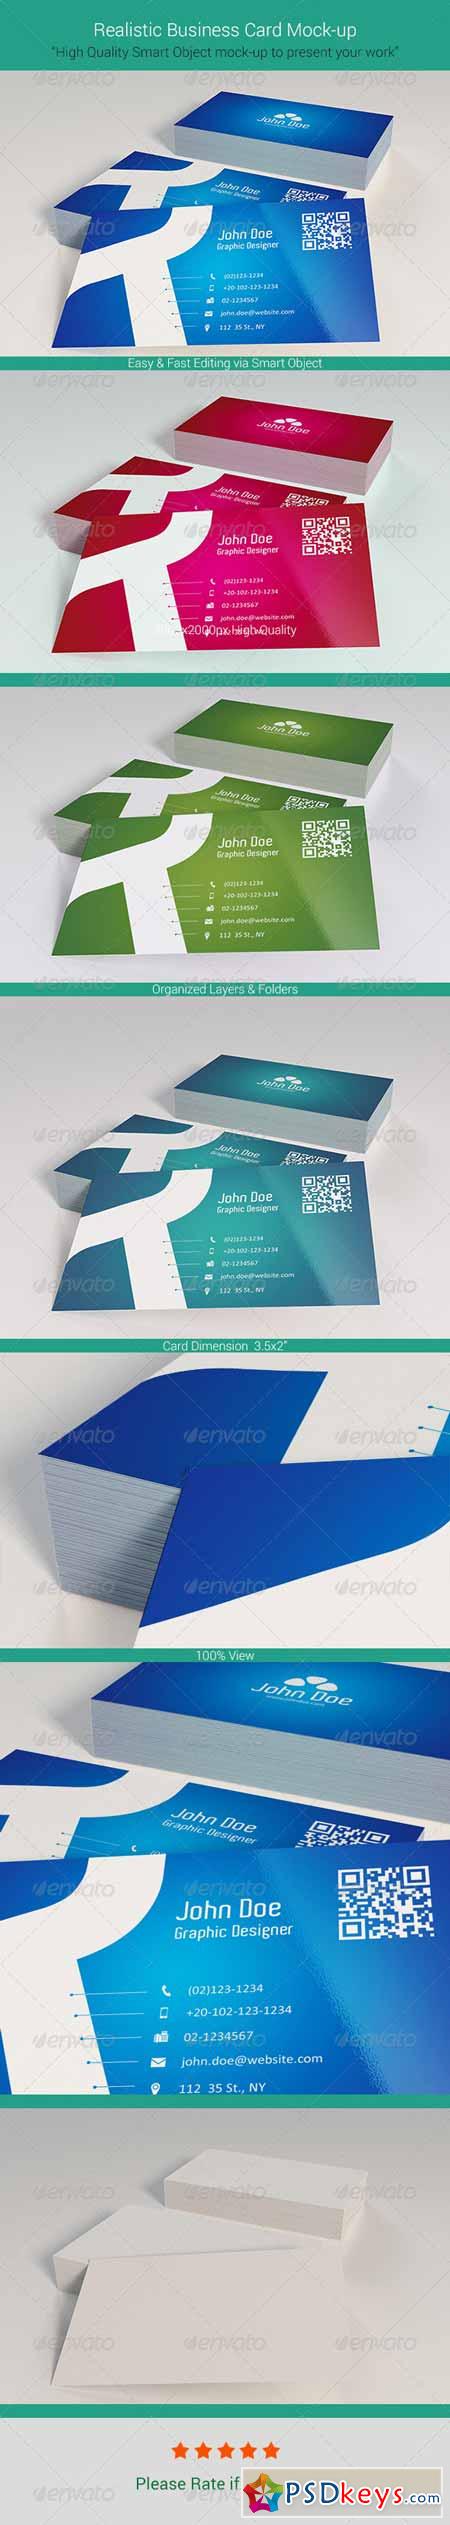 Realistic Business Card Mock-Up 6042400